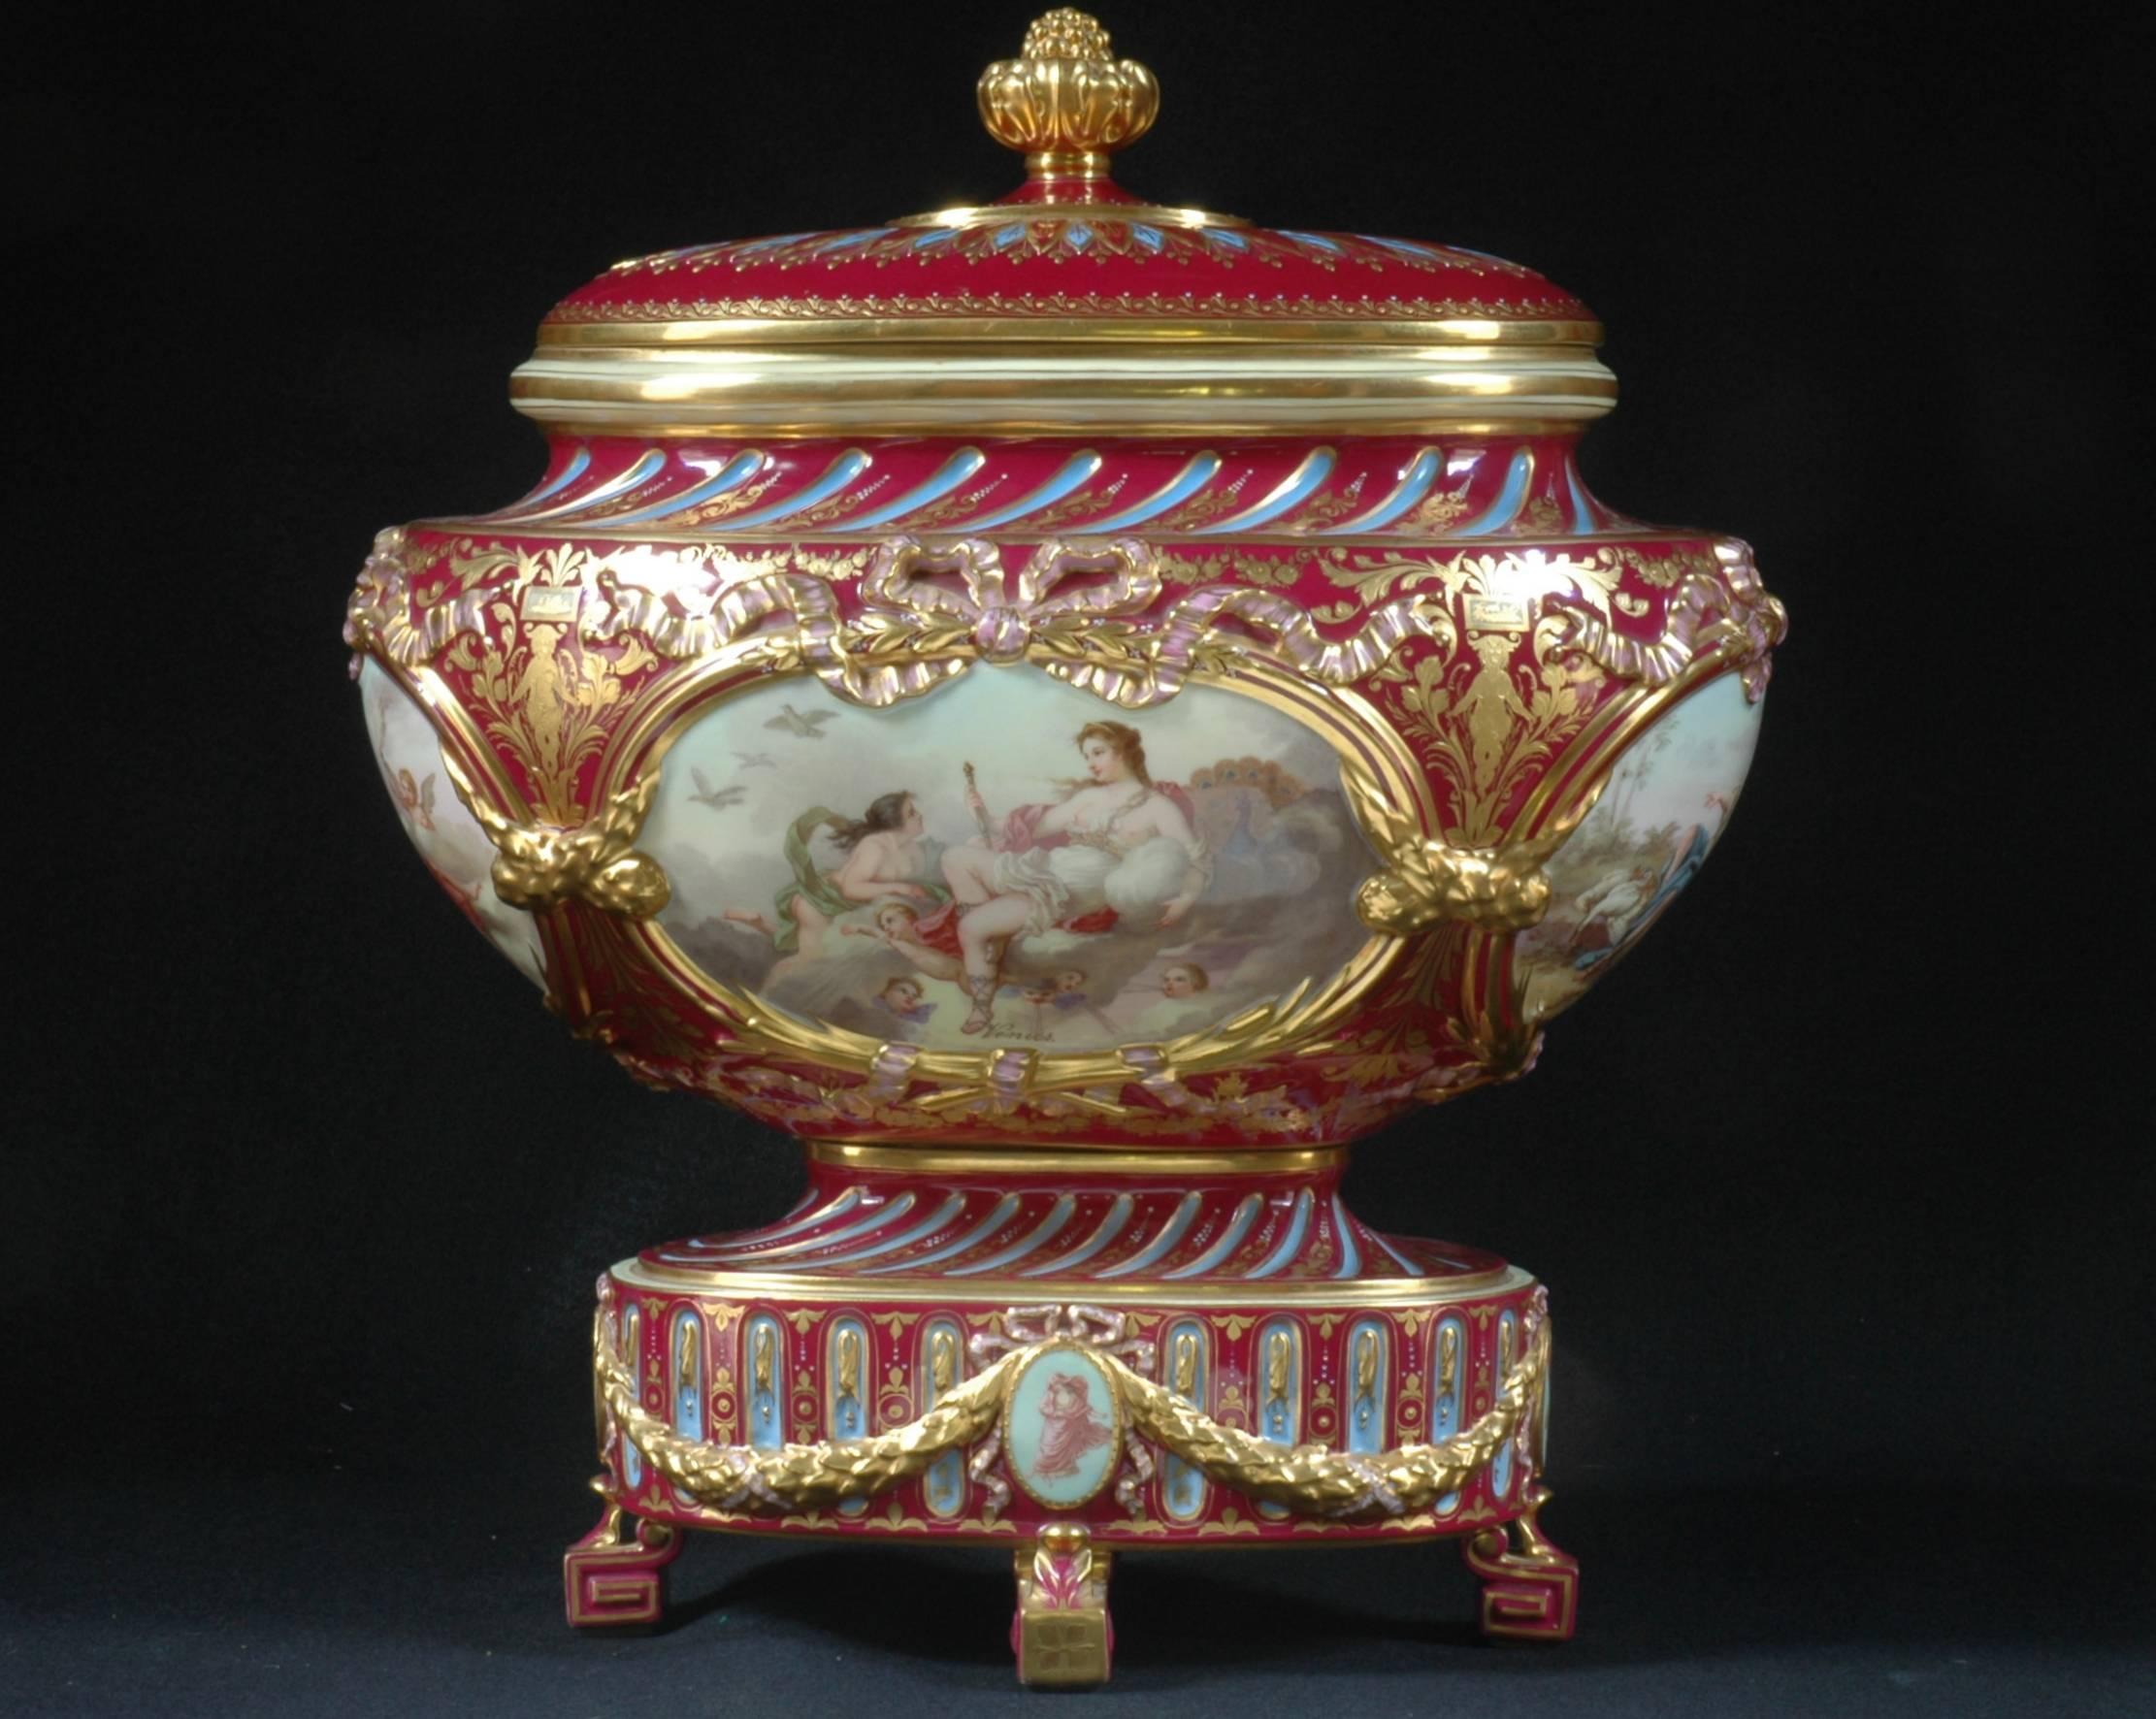 Very elaborate 19th century covered royal Vienna urn features four oval paintings of women. There are gilt bows above each oval and gilt foliage surrounding each section.
Diagonal painted fluting design compliments panels above and below with a